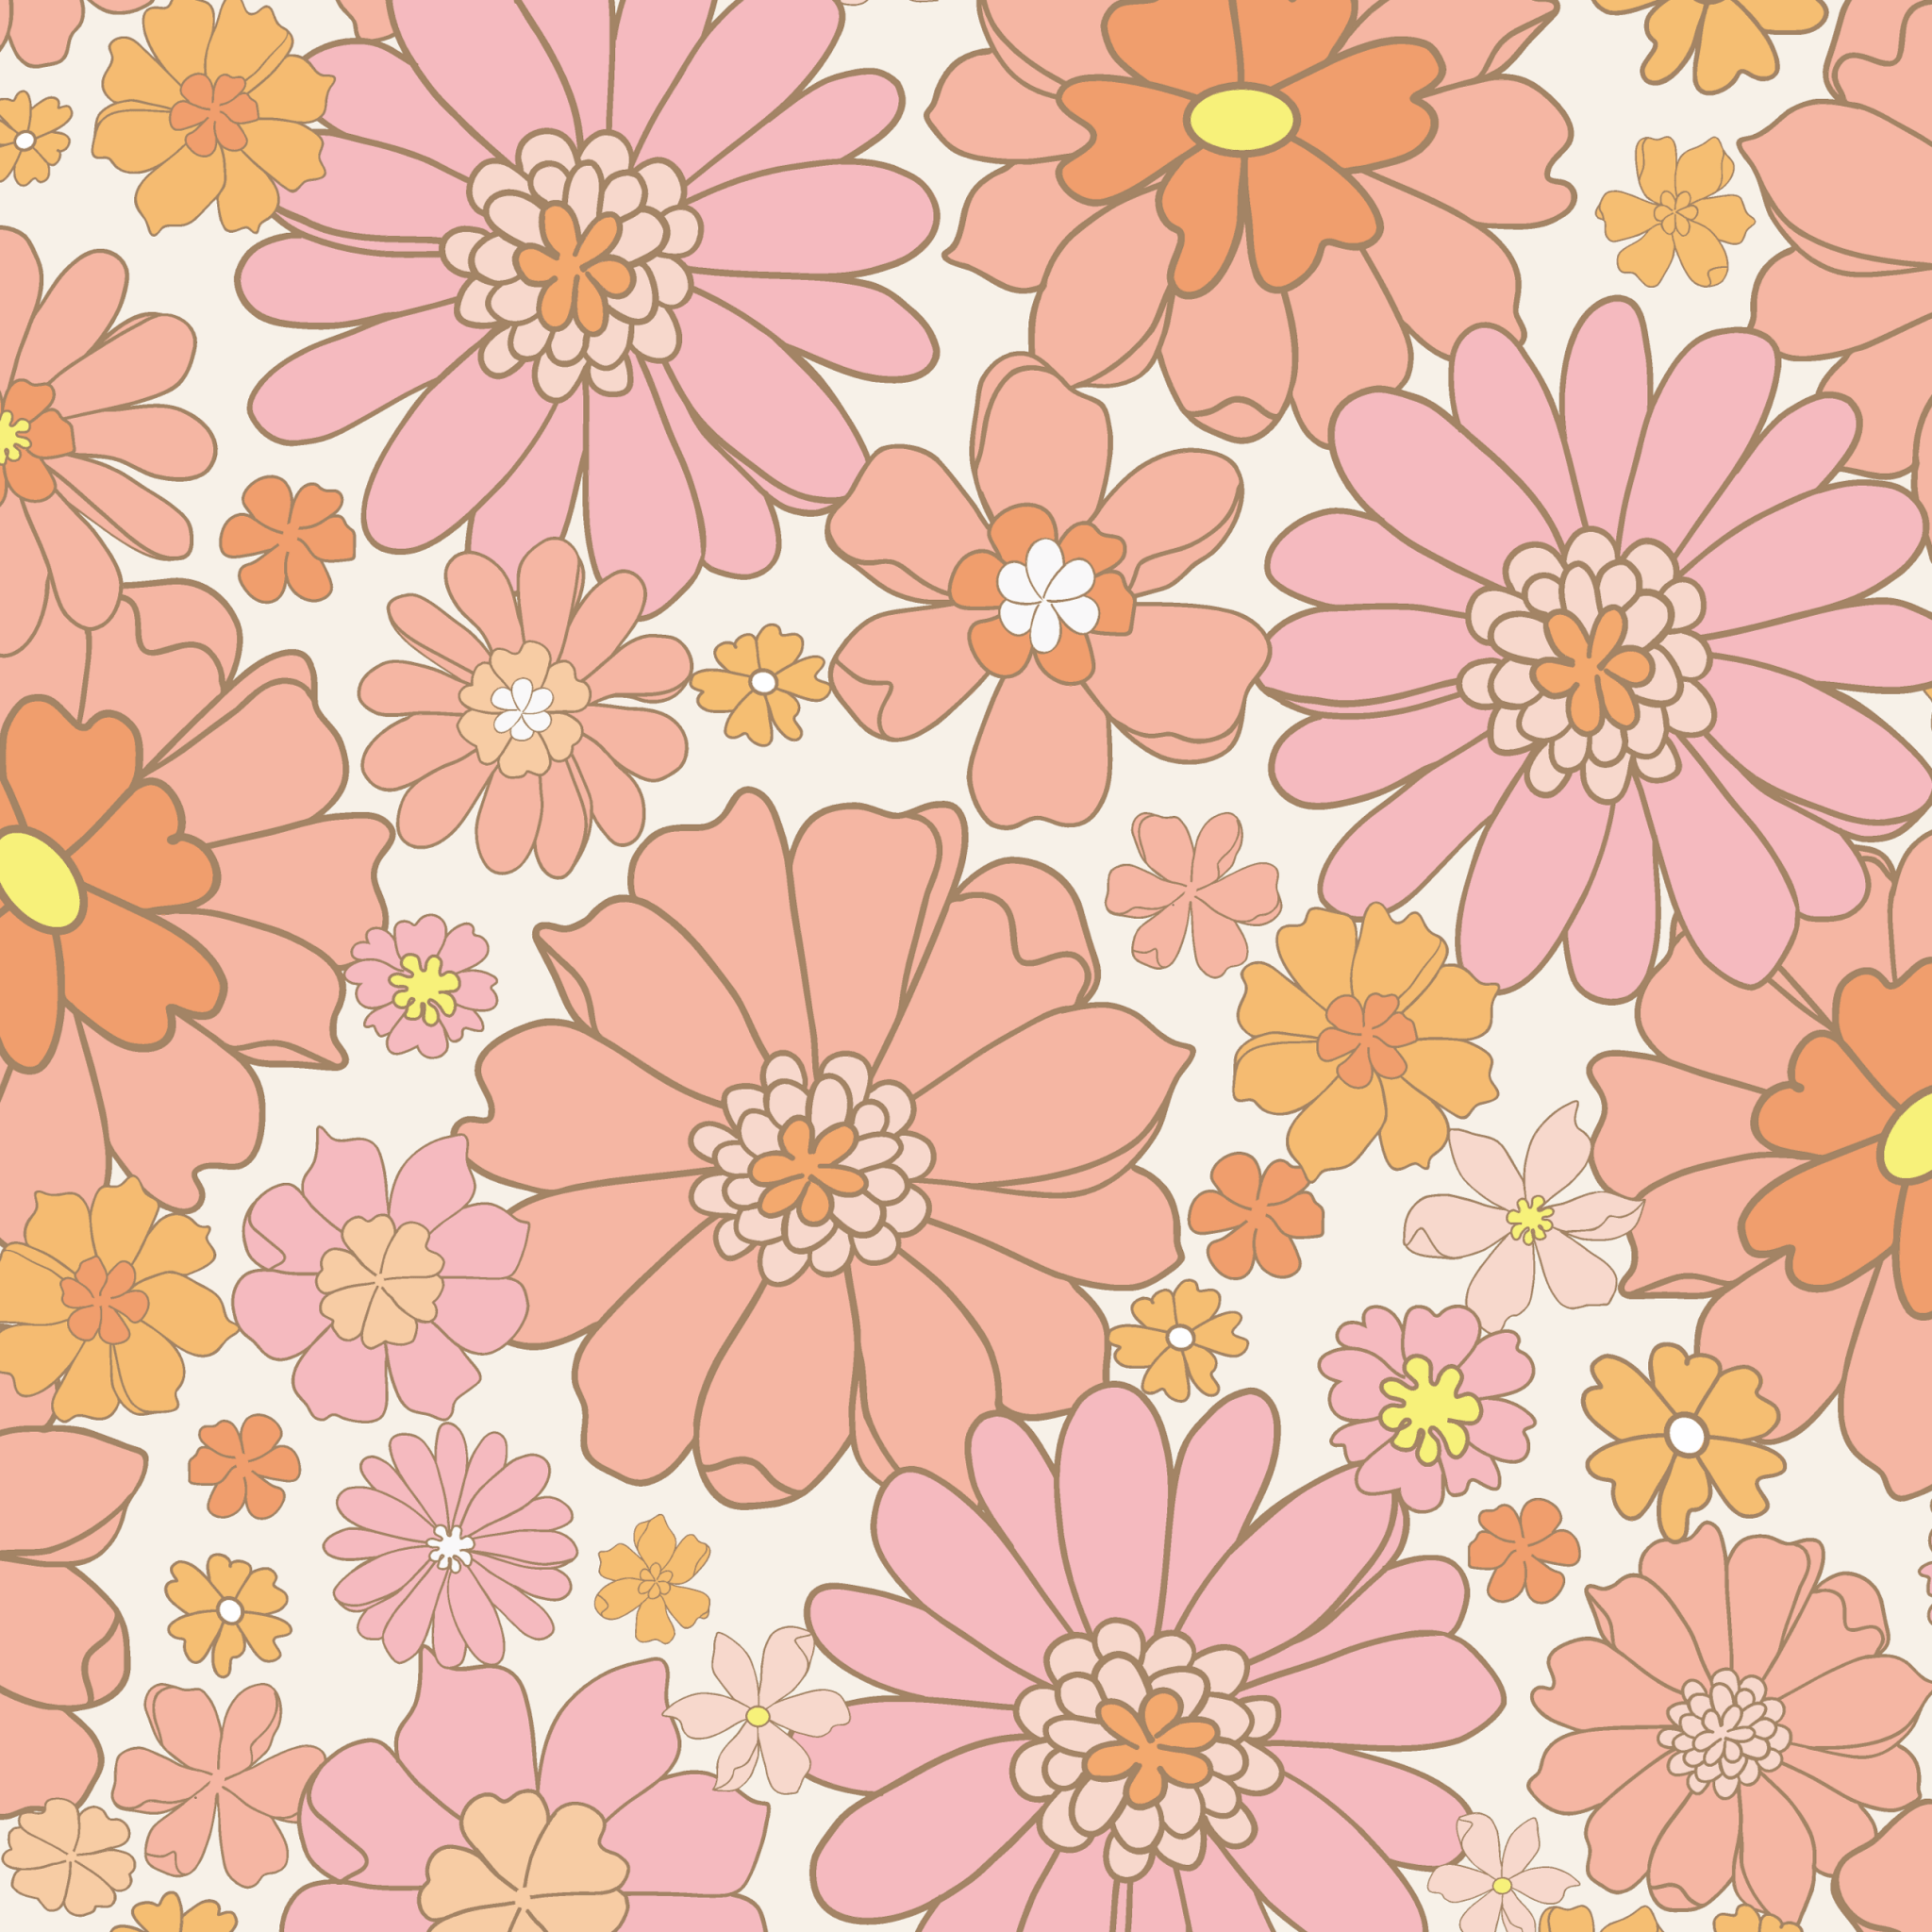 Seamless pattern sample of retro floral wallpaper with a variety of pink and orange flowers, perfect for adding a touch of vintage charm to any room.